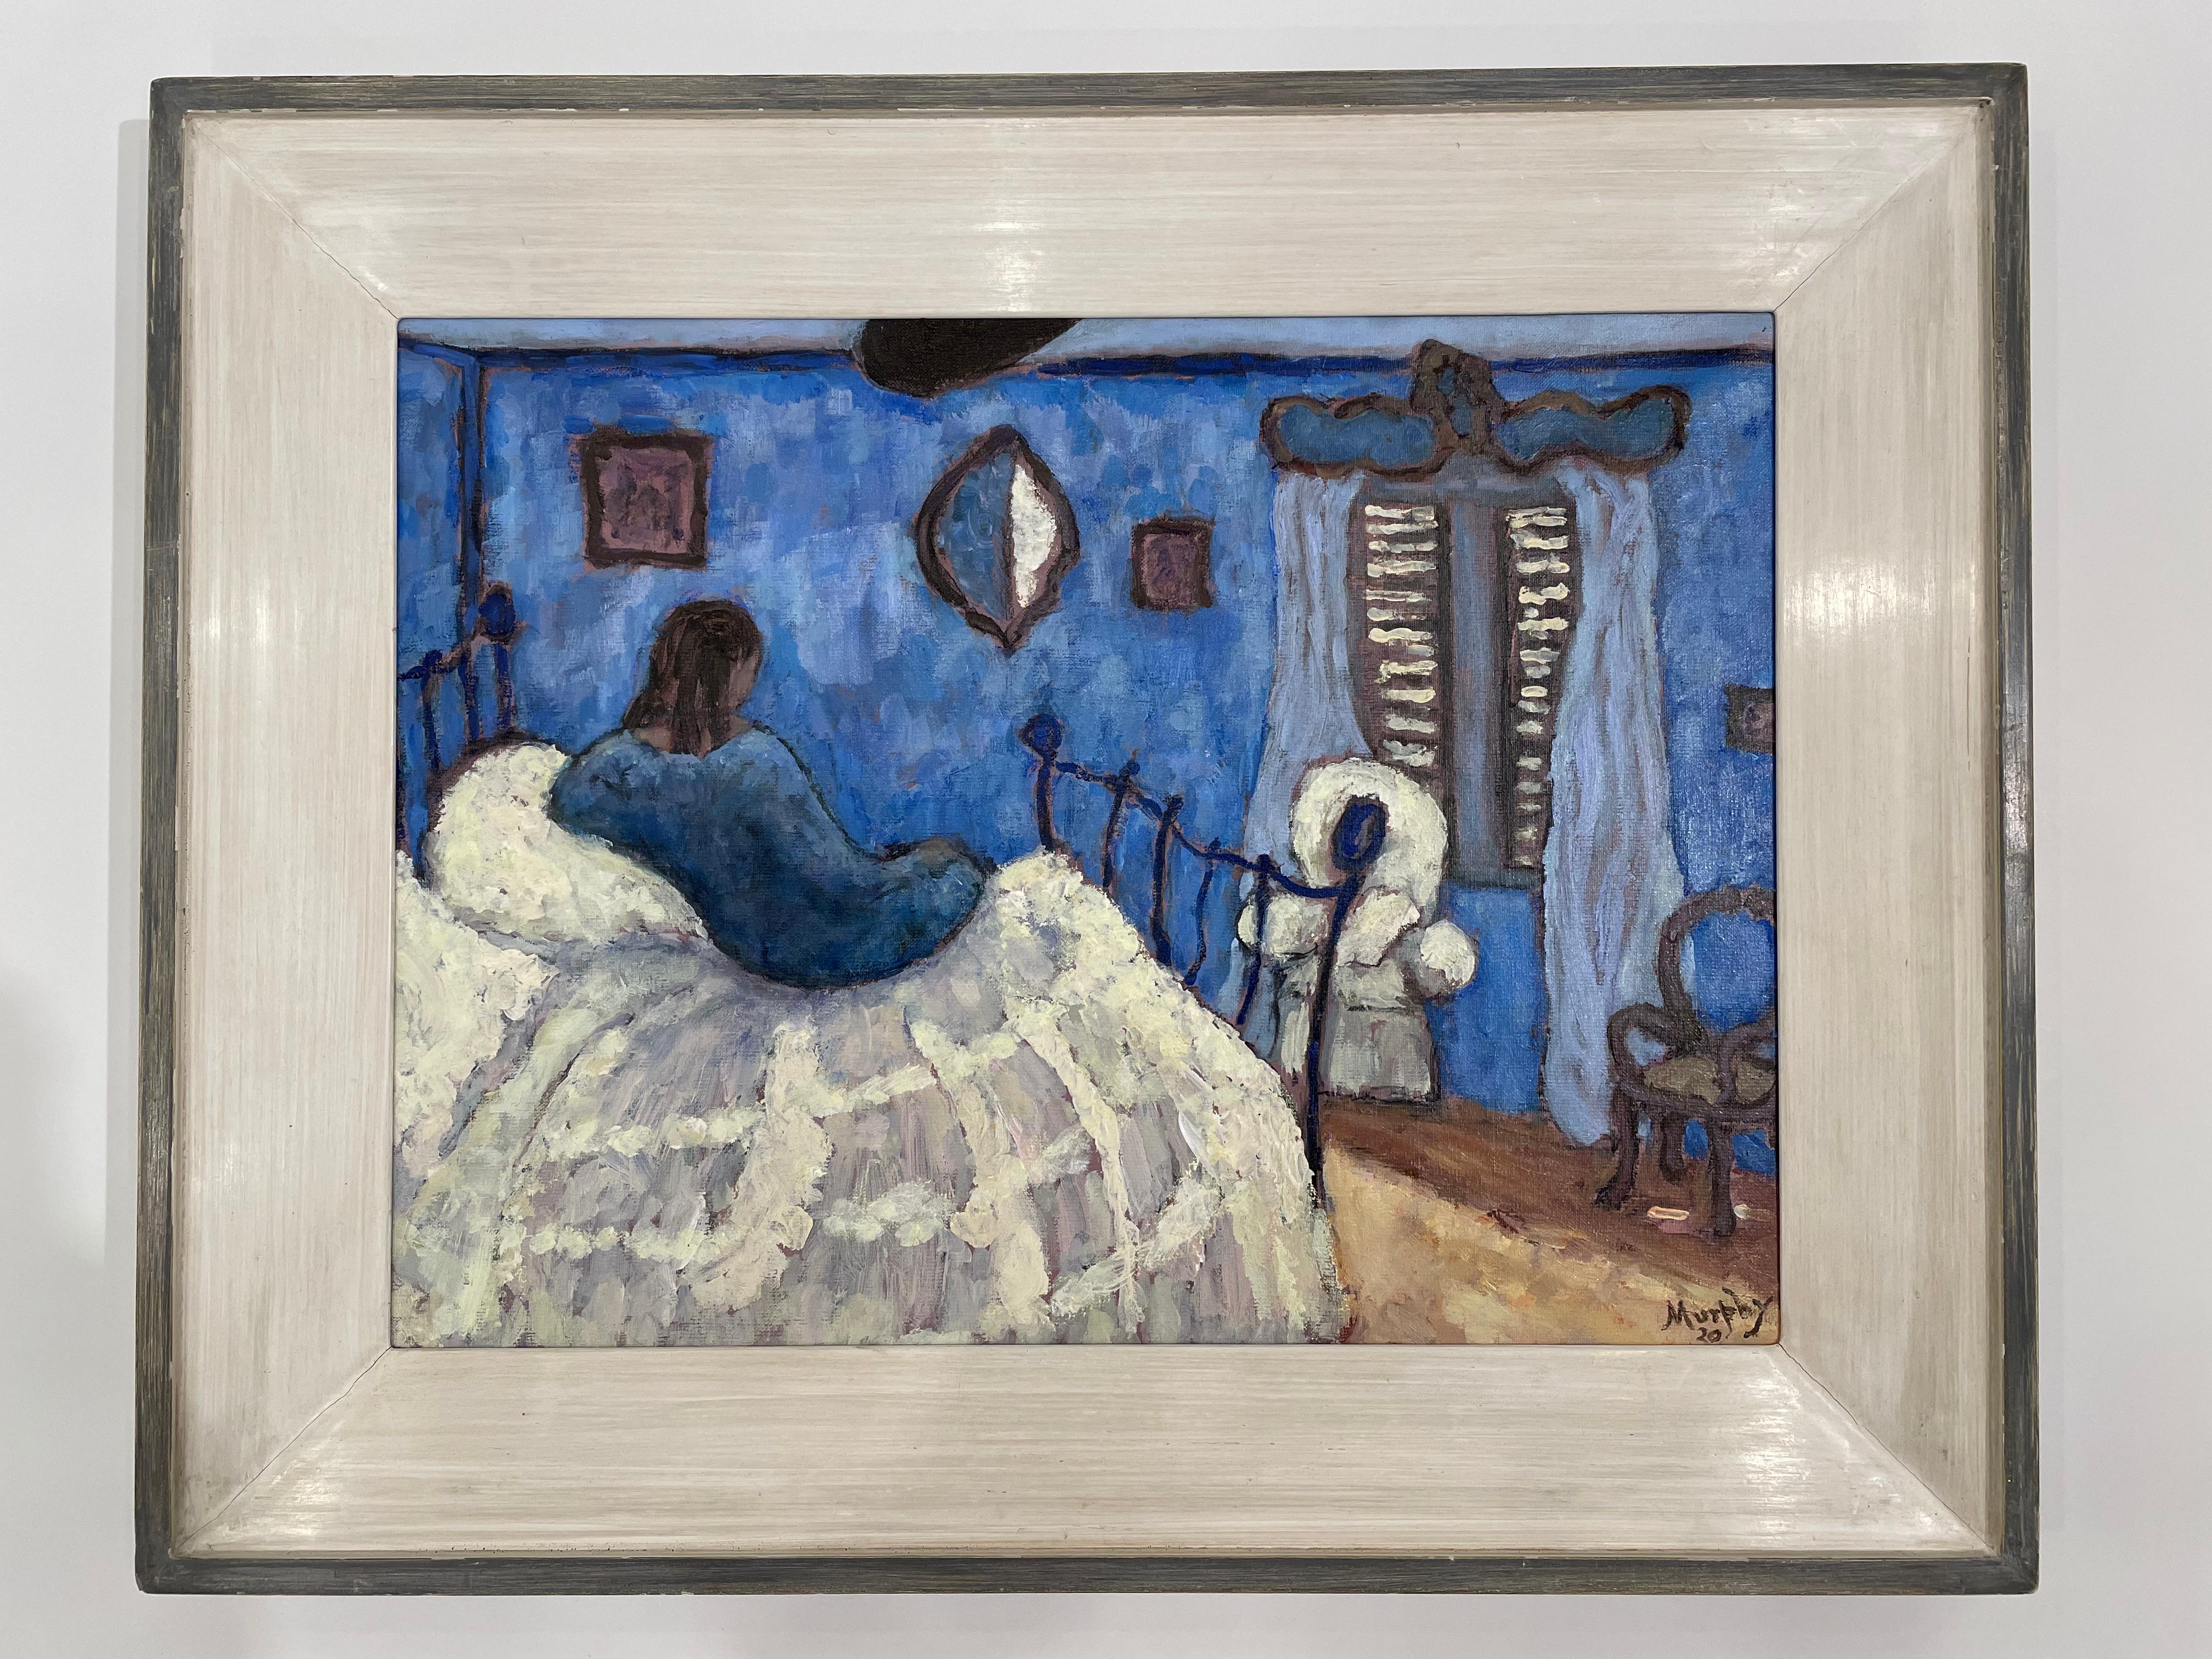 The Blue Room painted in the inimitable style of English-Irish-French artist, Anthony Murphy.

In the artist's own words: In the early sixties, my father would travel with his family to visit his brother, my uncle, the poet Richard Murphy, living in